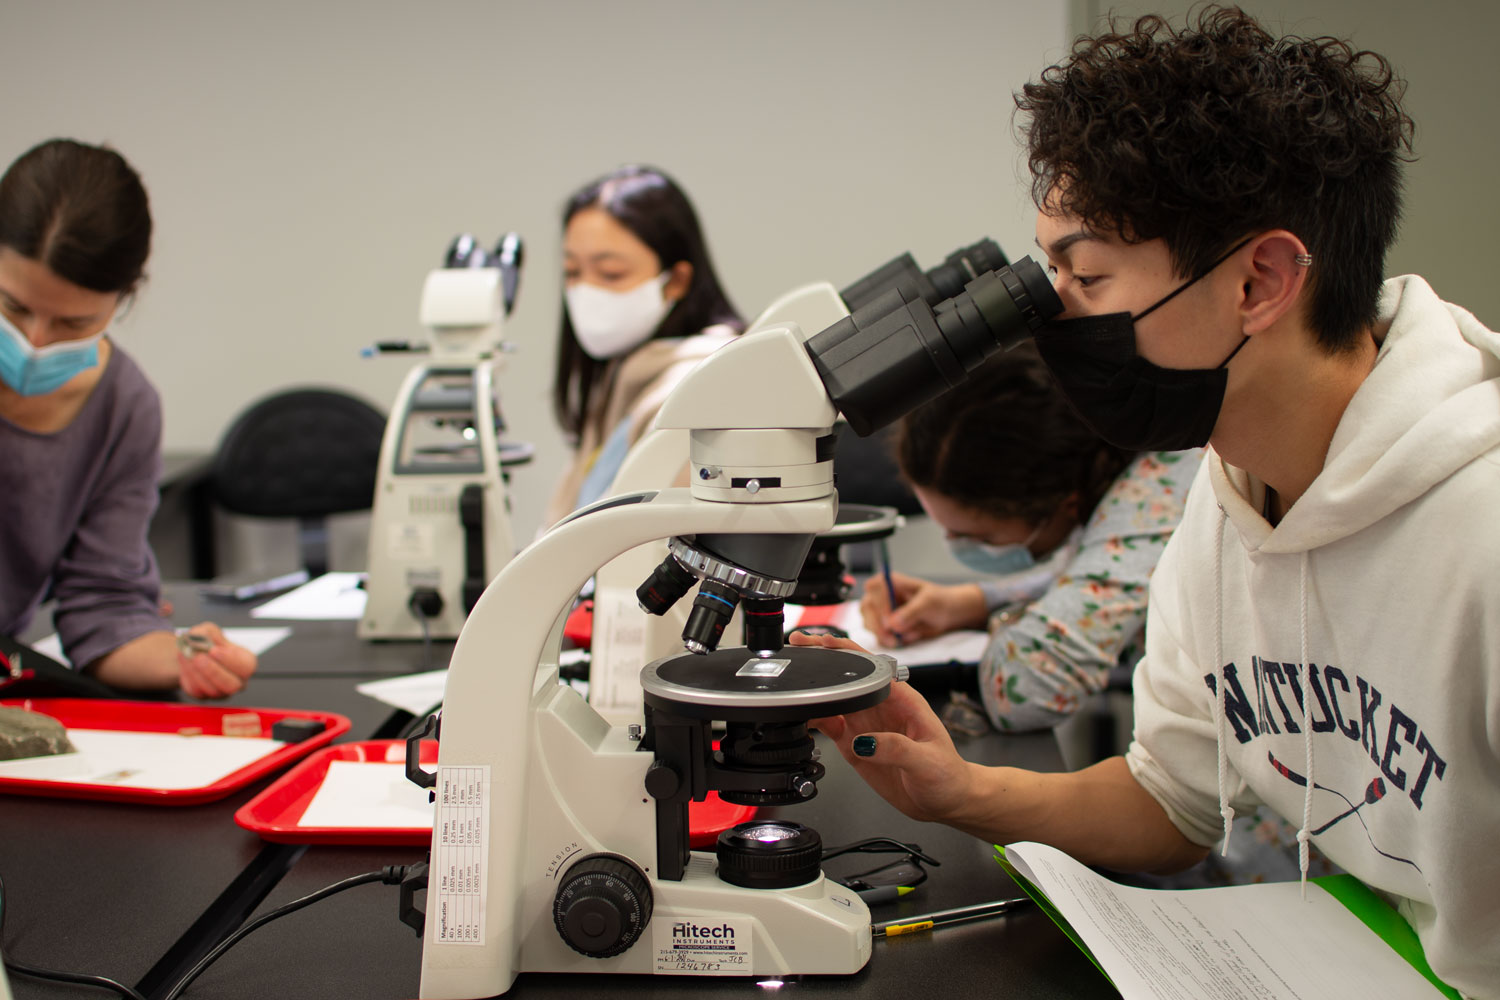 A student using a microscope in the lab.